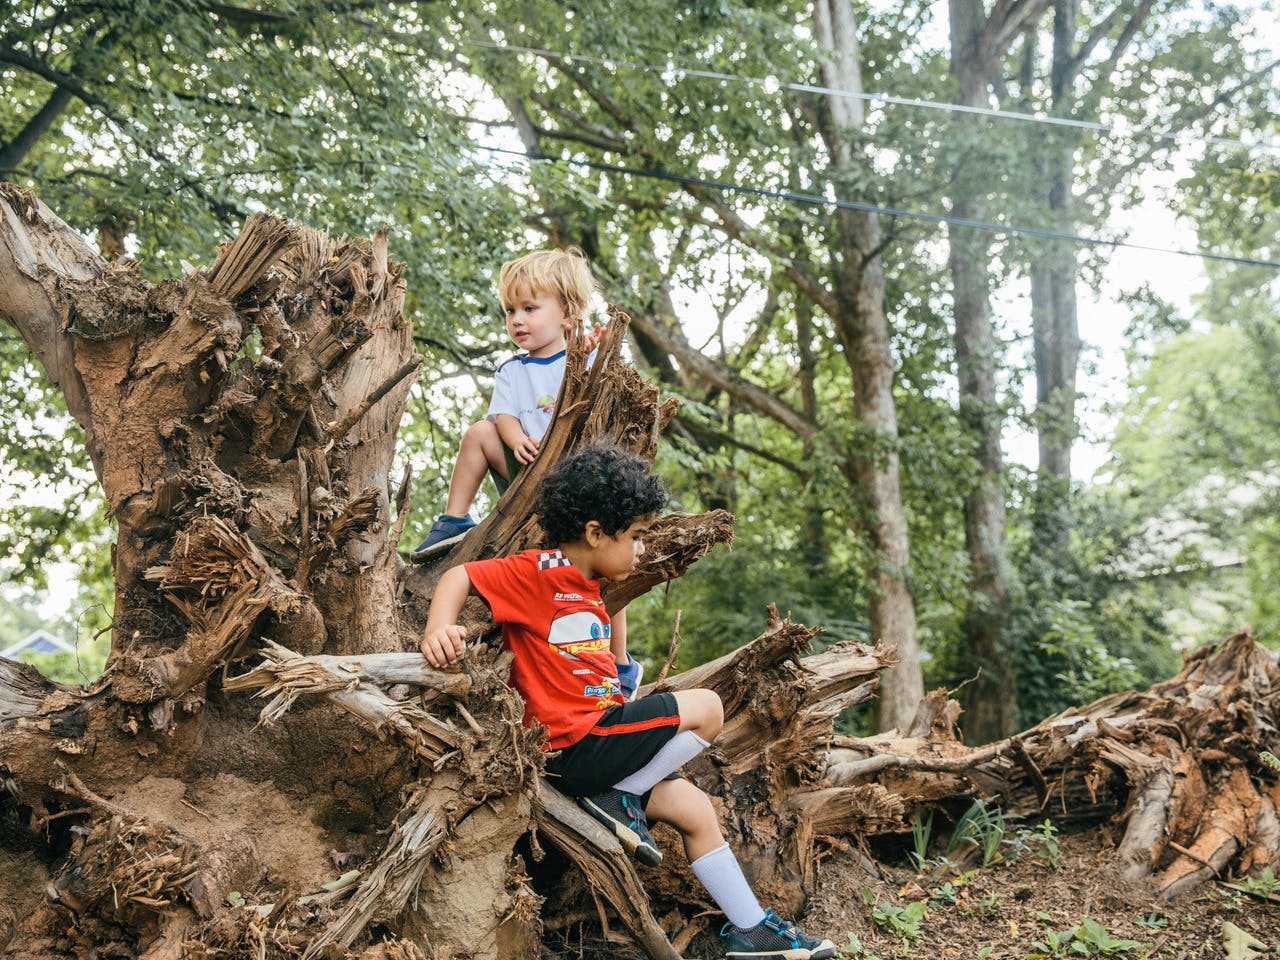 Two young boys play on a large tree trunk.